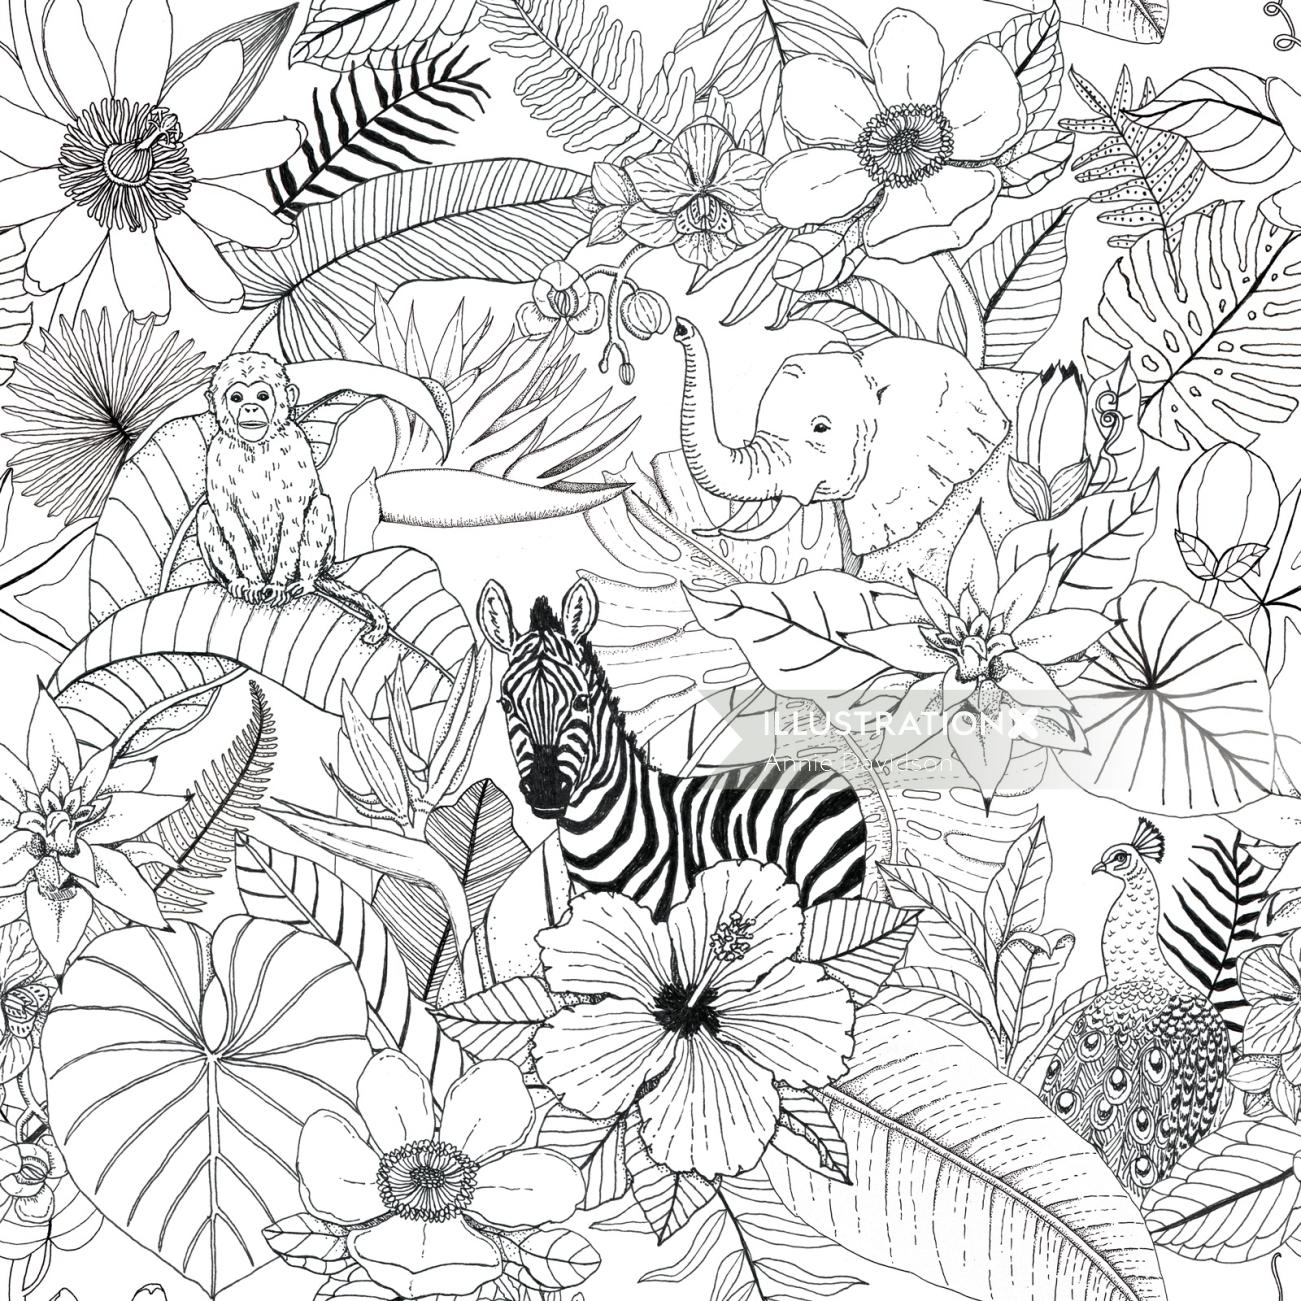 Black and white art of animals in the forest 